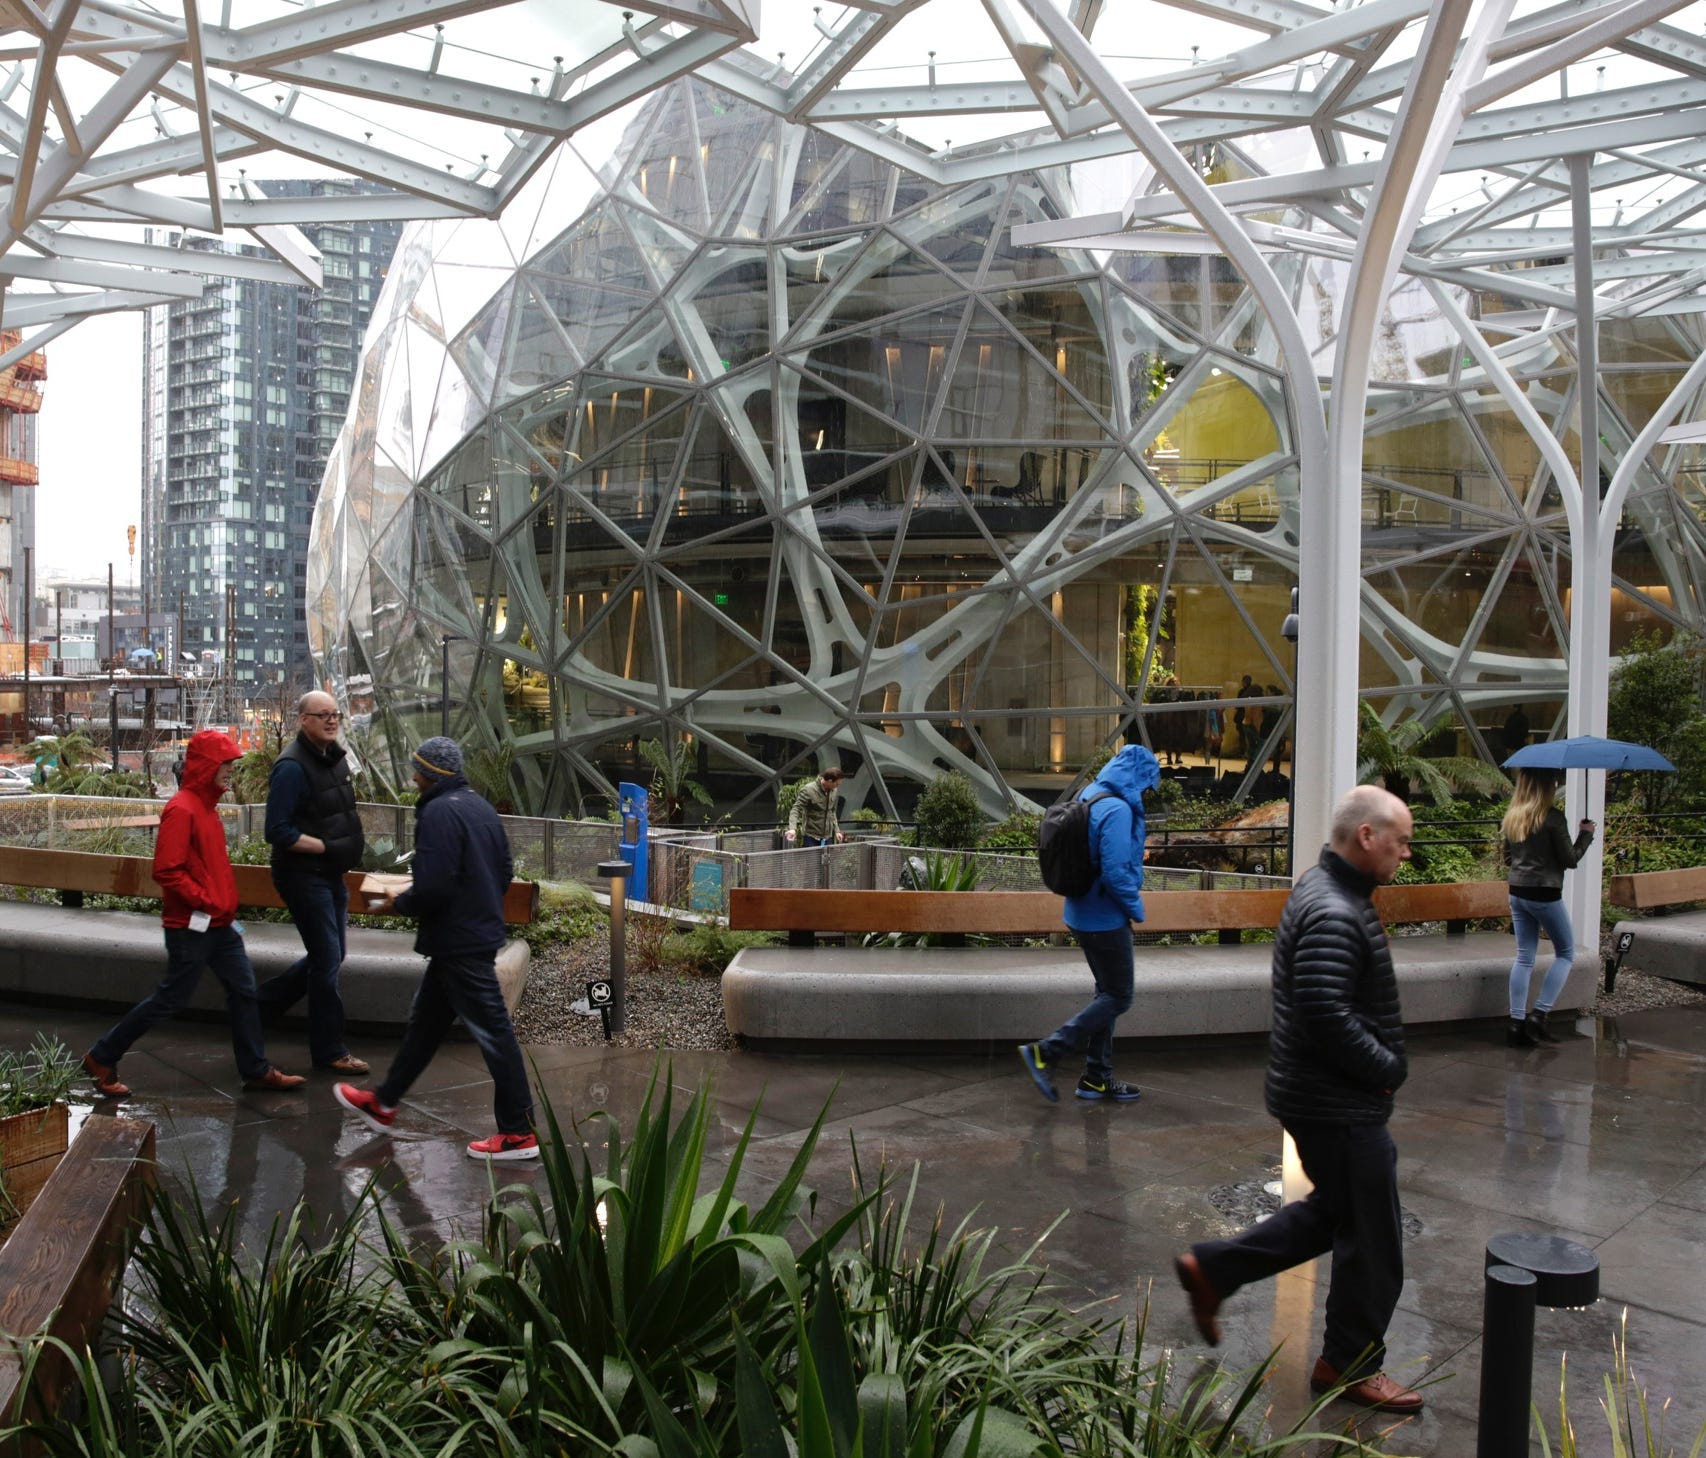 People take a tour during the grand opening of the Amazon Spheres in Seattle on Jan. 29, 2018.